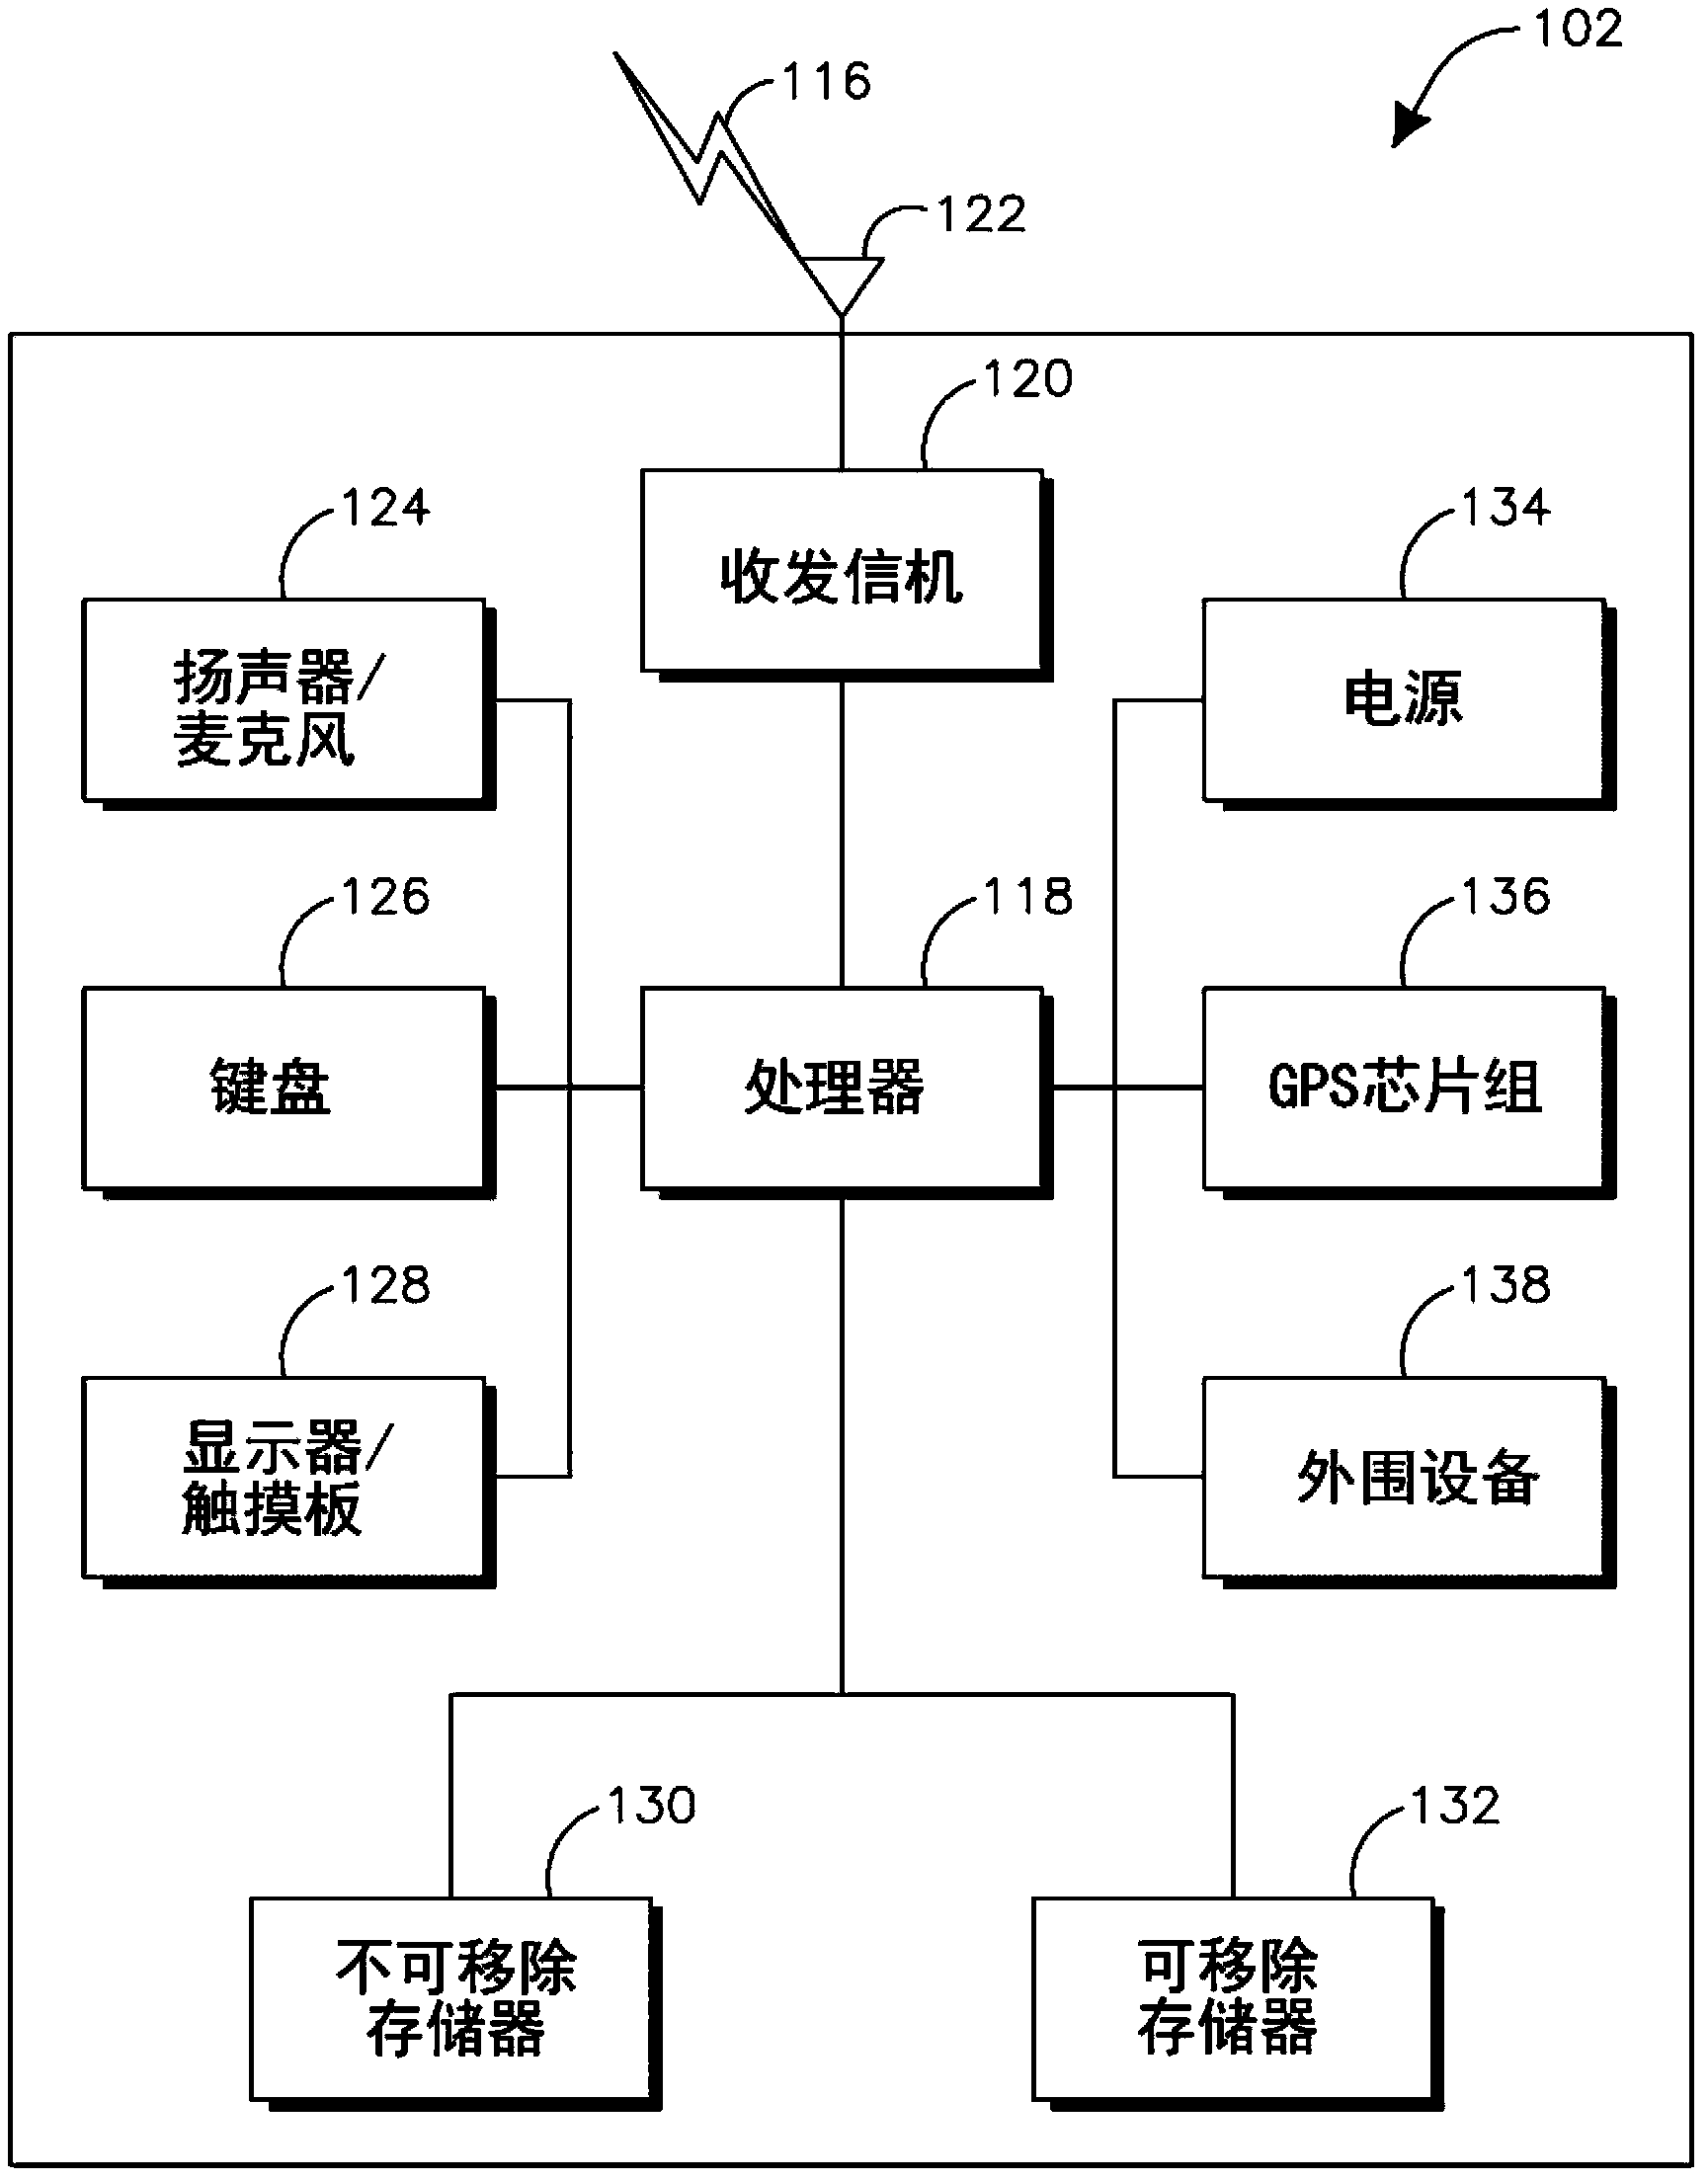 Method and apparatus for performing channel aggregation and medium access control retransmission